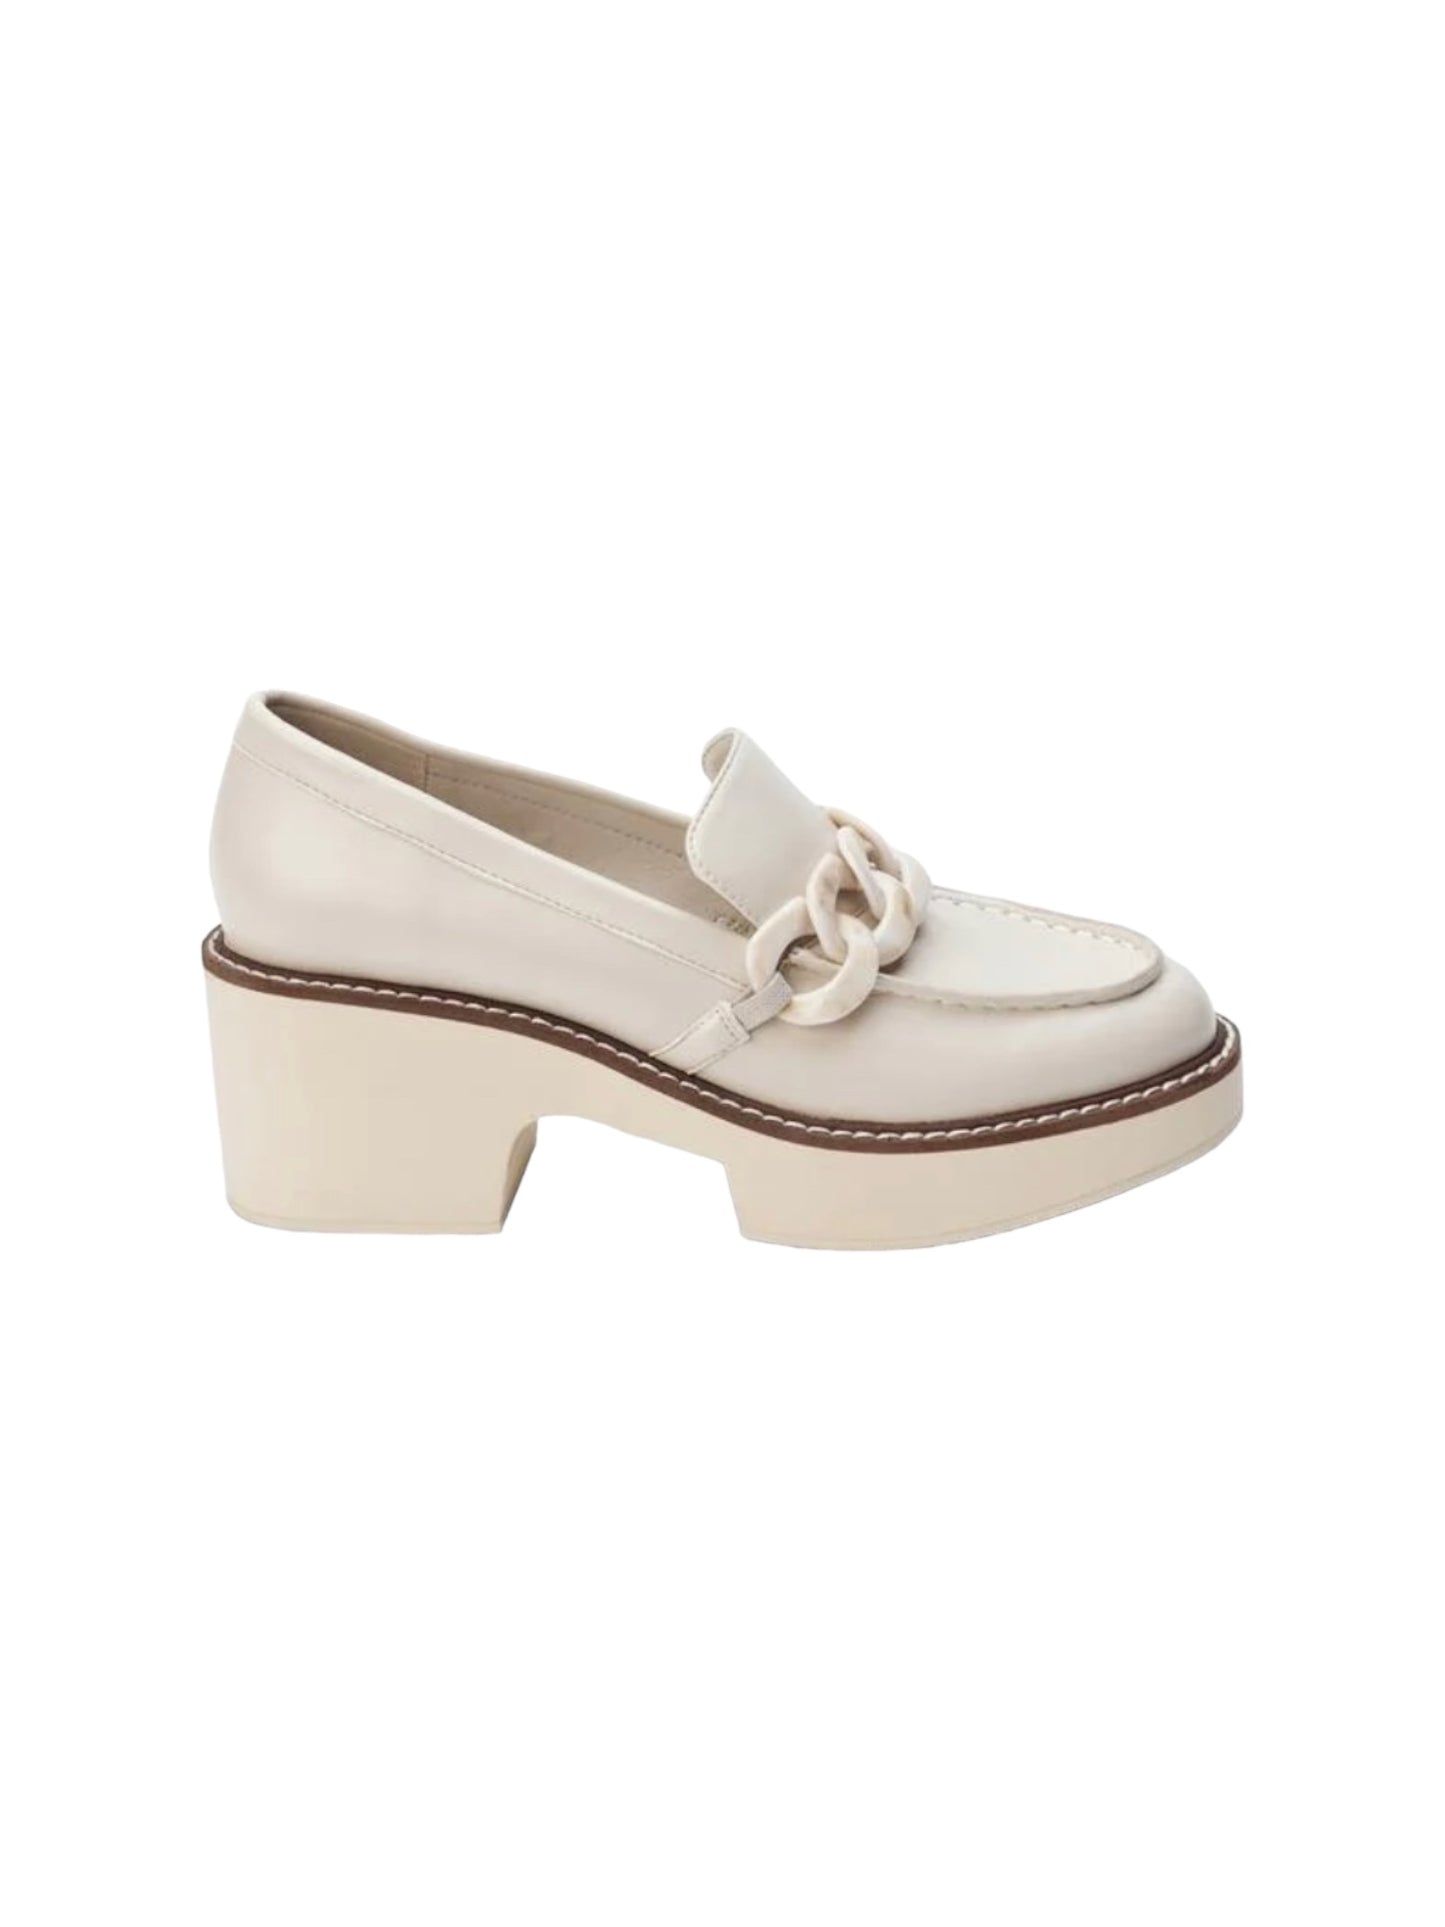 Coconuts by Matisse Louie Platform Loafer